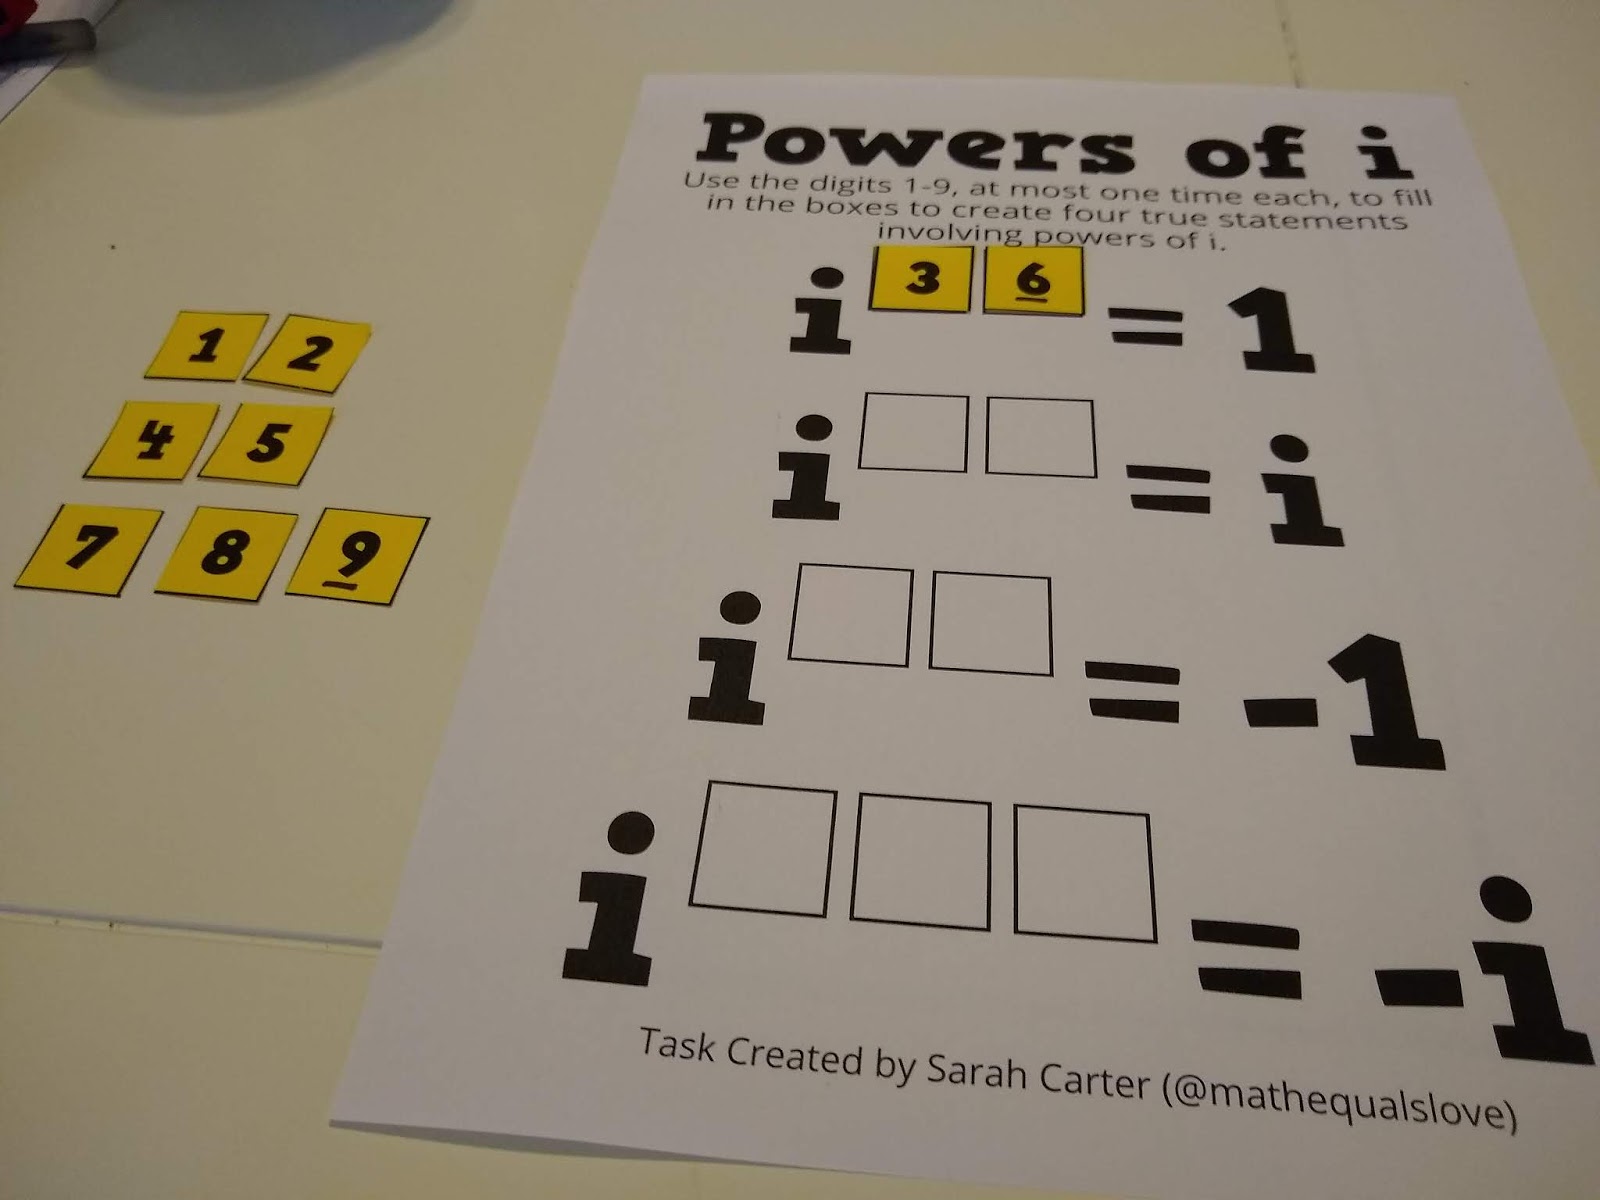 Powers of i Activity with Small Number Cards to Move Around.